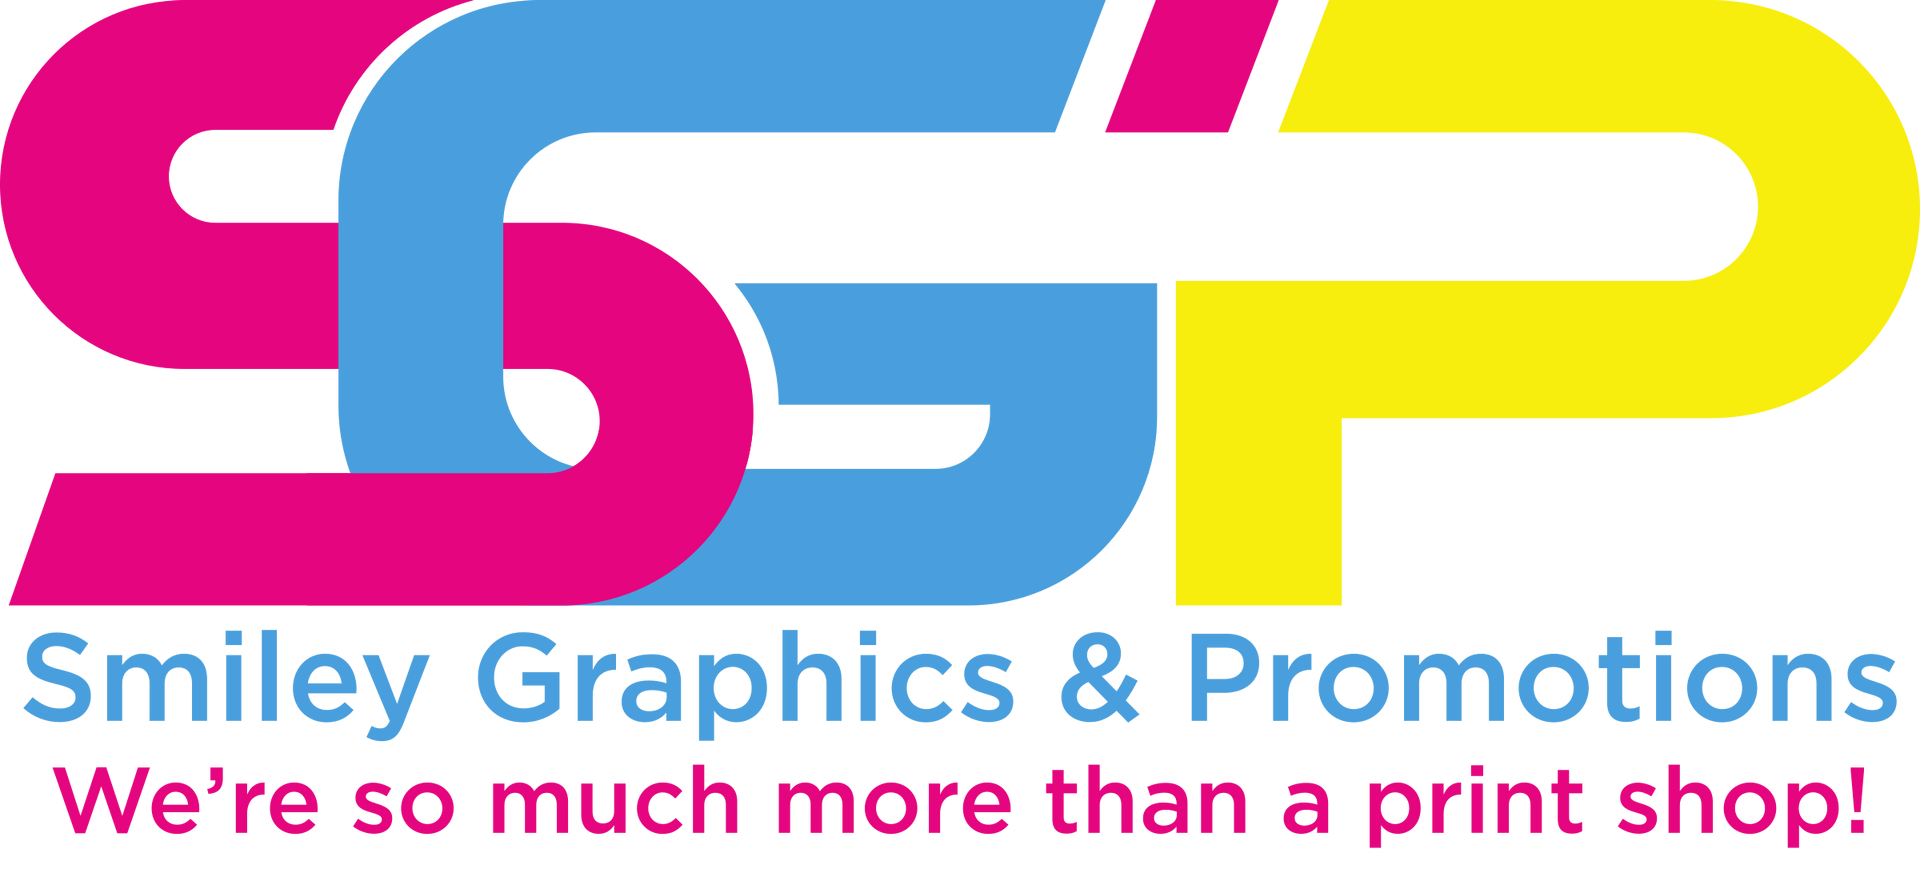 Smiley Graphics & Promotions